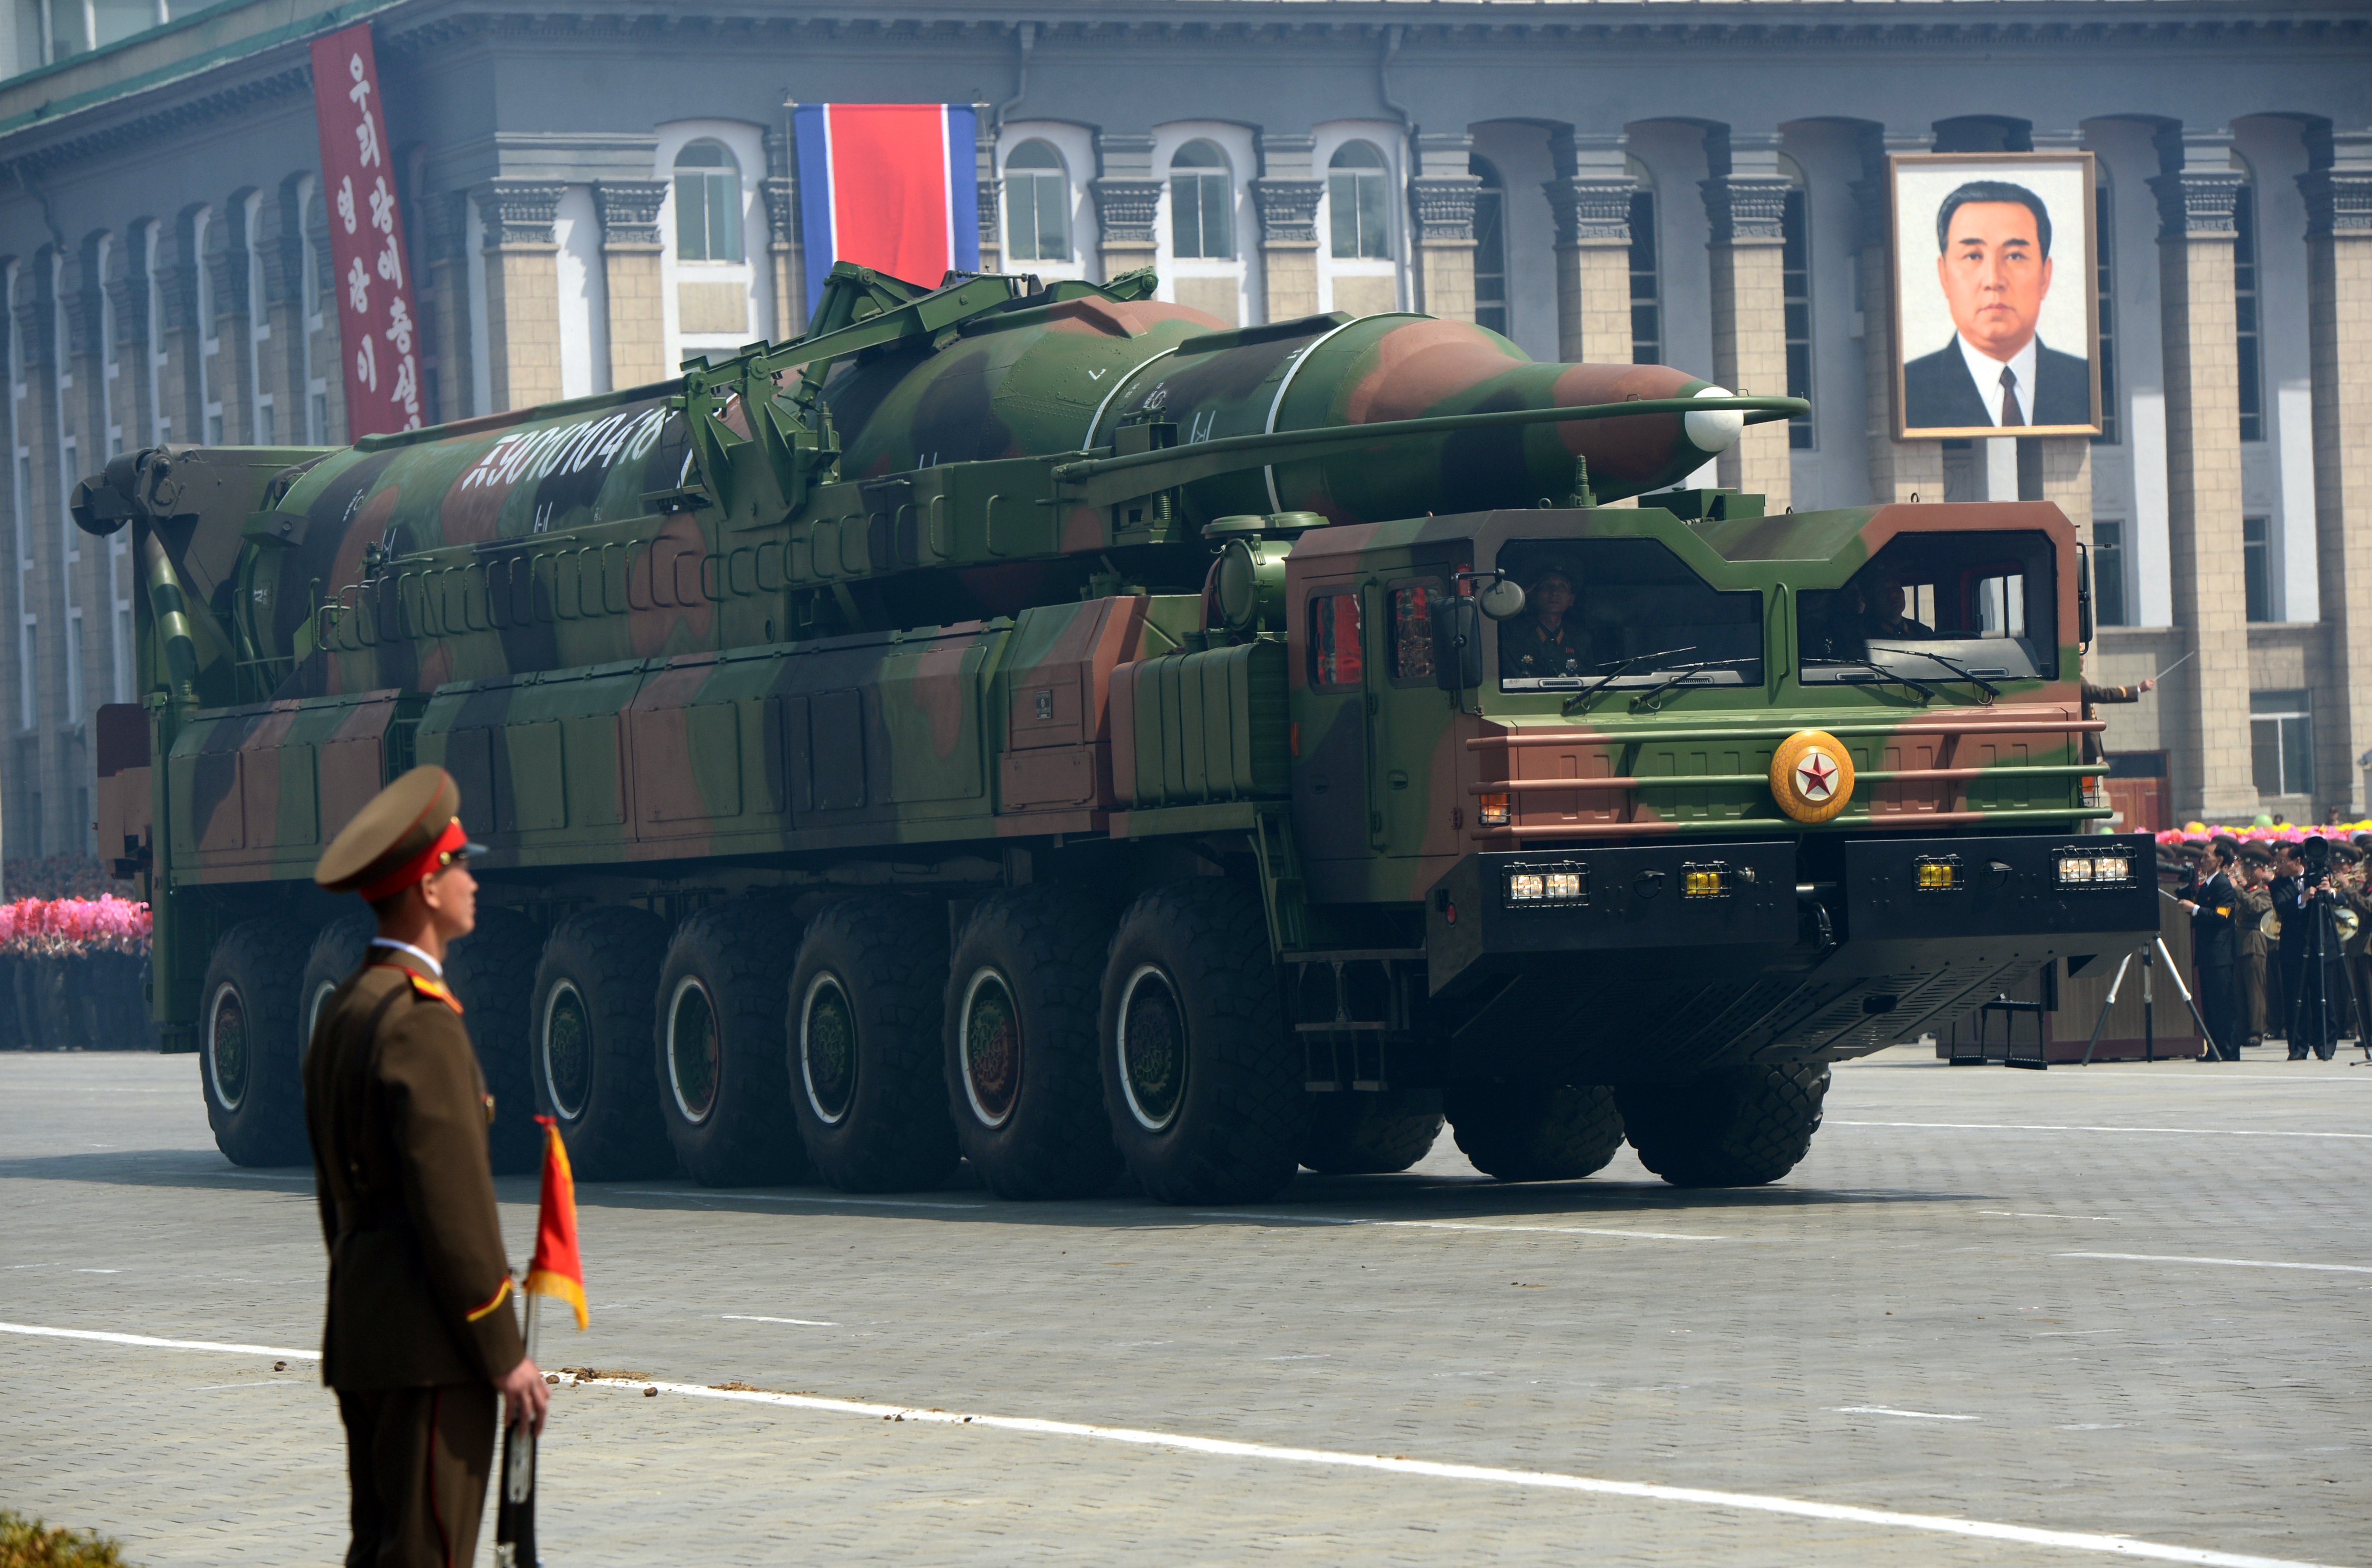 North Korean Missiles Can’t Actually Reach Europe